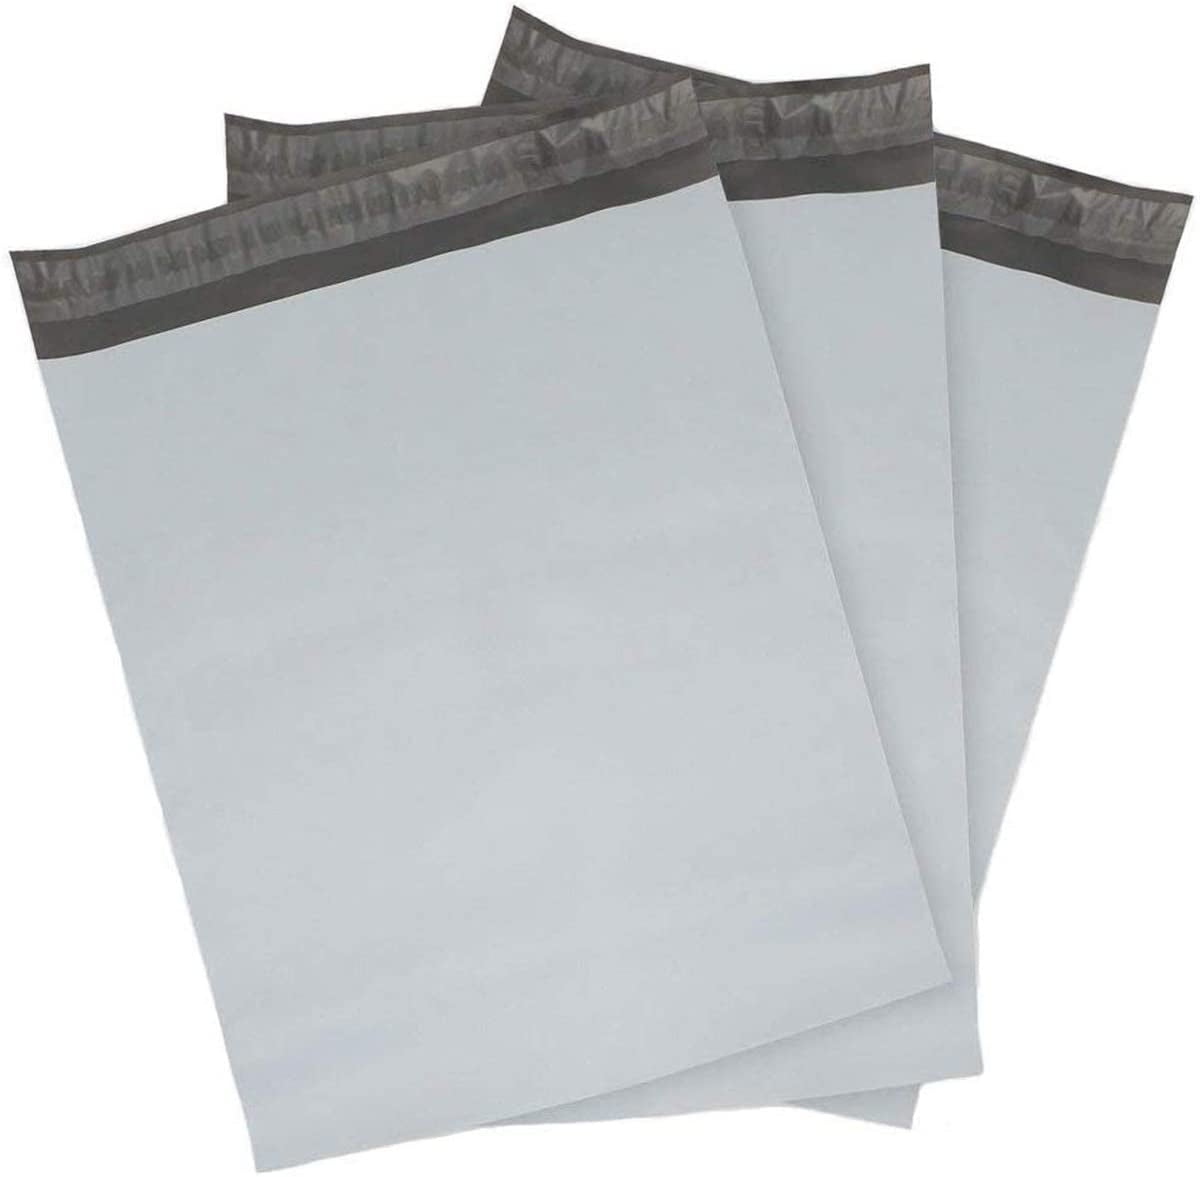 19 x 24 Inch Professional Industrial 2.5m Glossy Gray Poly Bag Mailer  Envelopes Self Adhesive - 300 Pack Count - Walmart.com